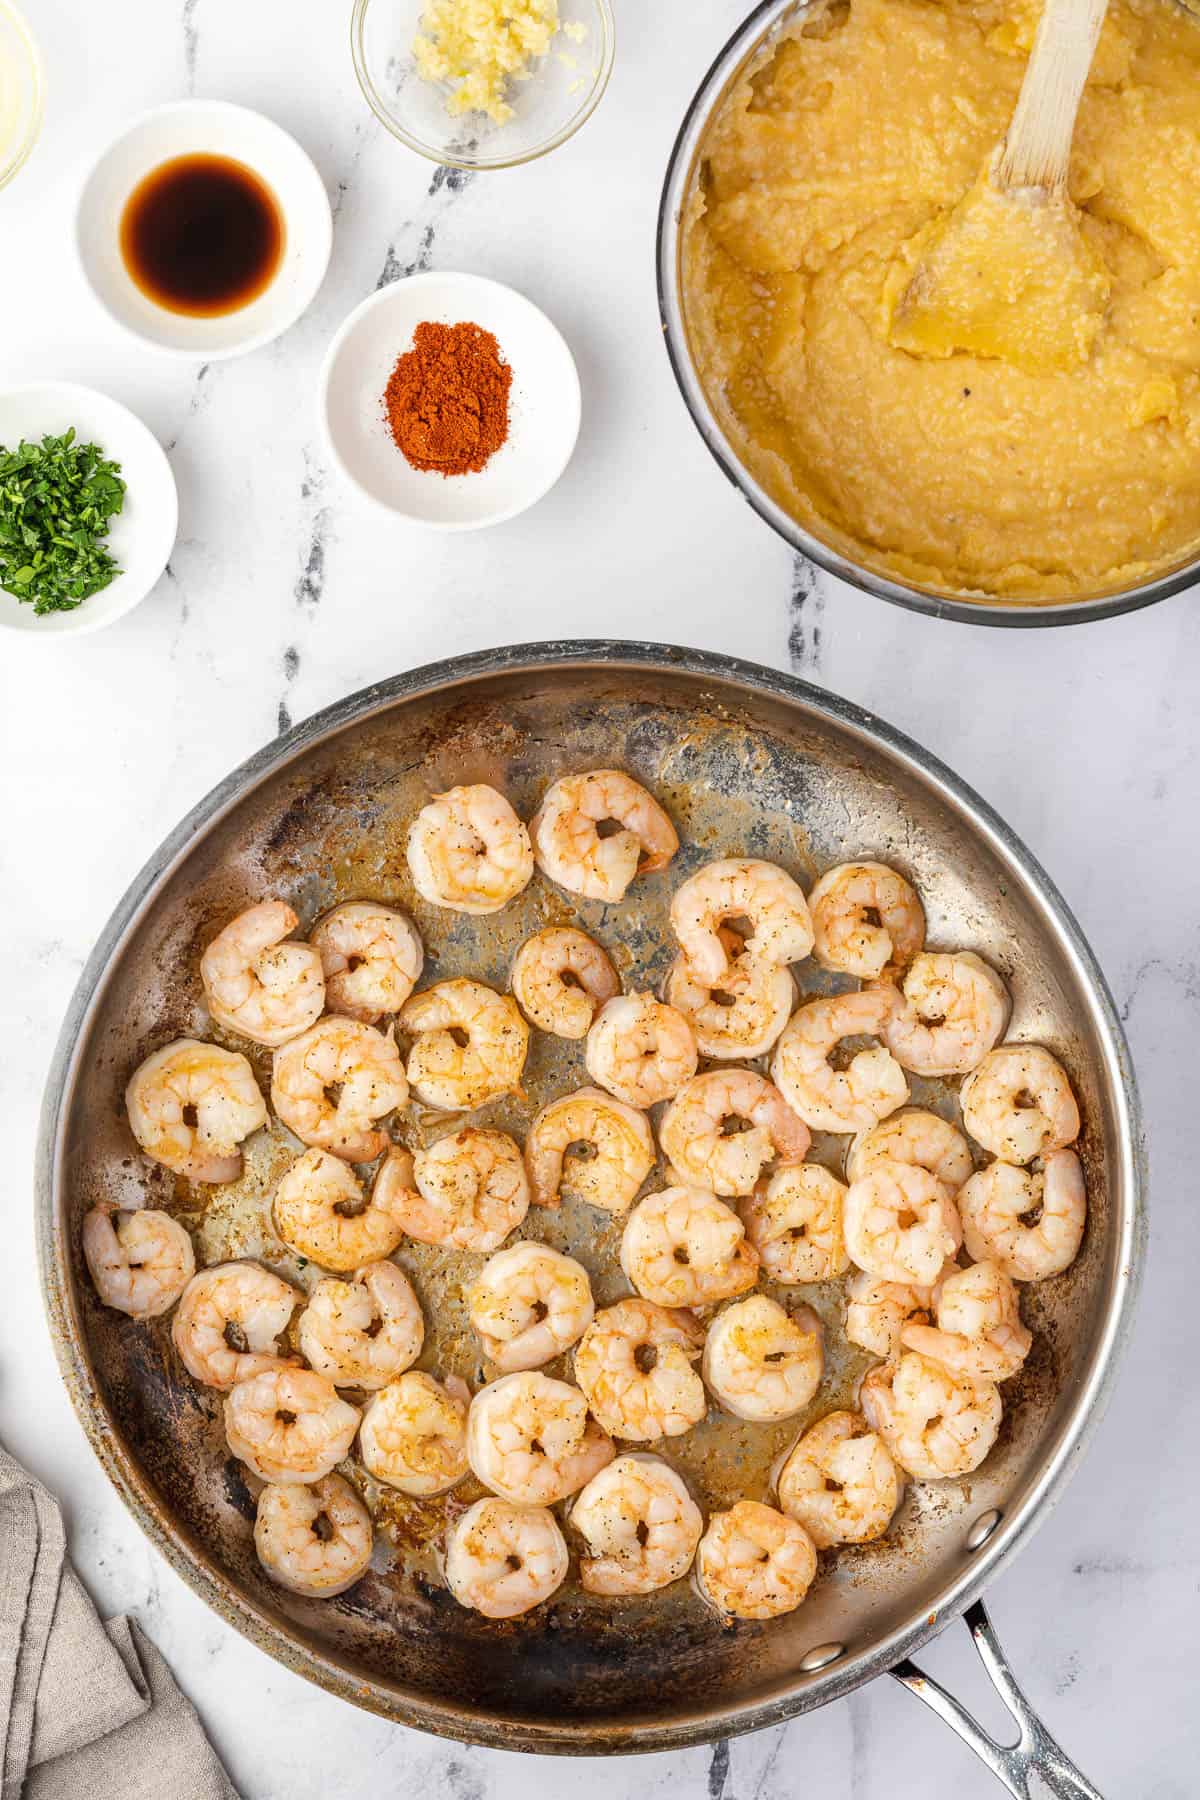 cooking shrimp for Shrimp and Grits recipe